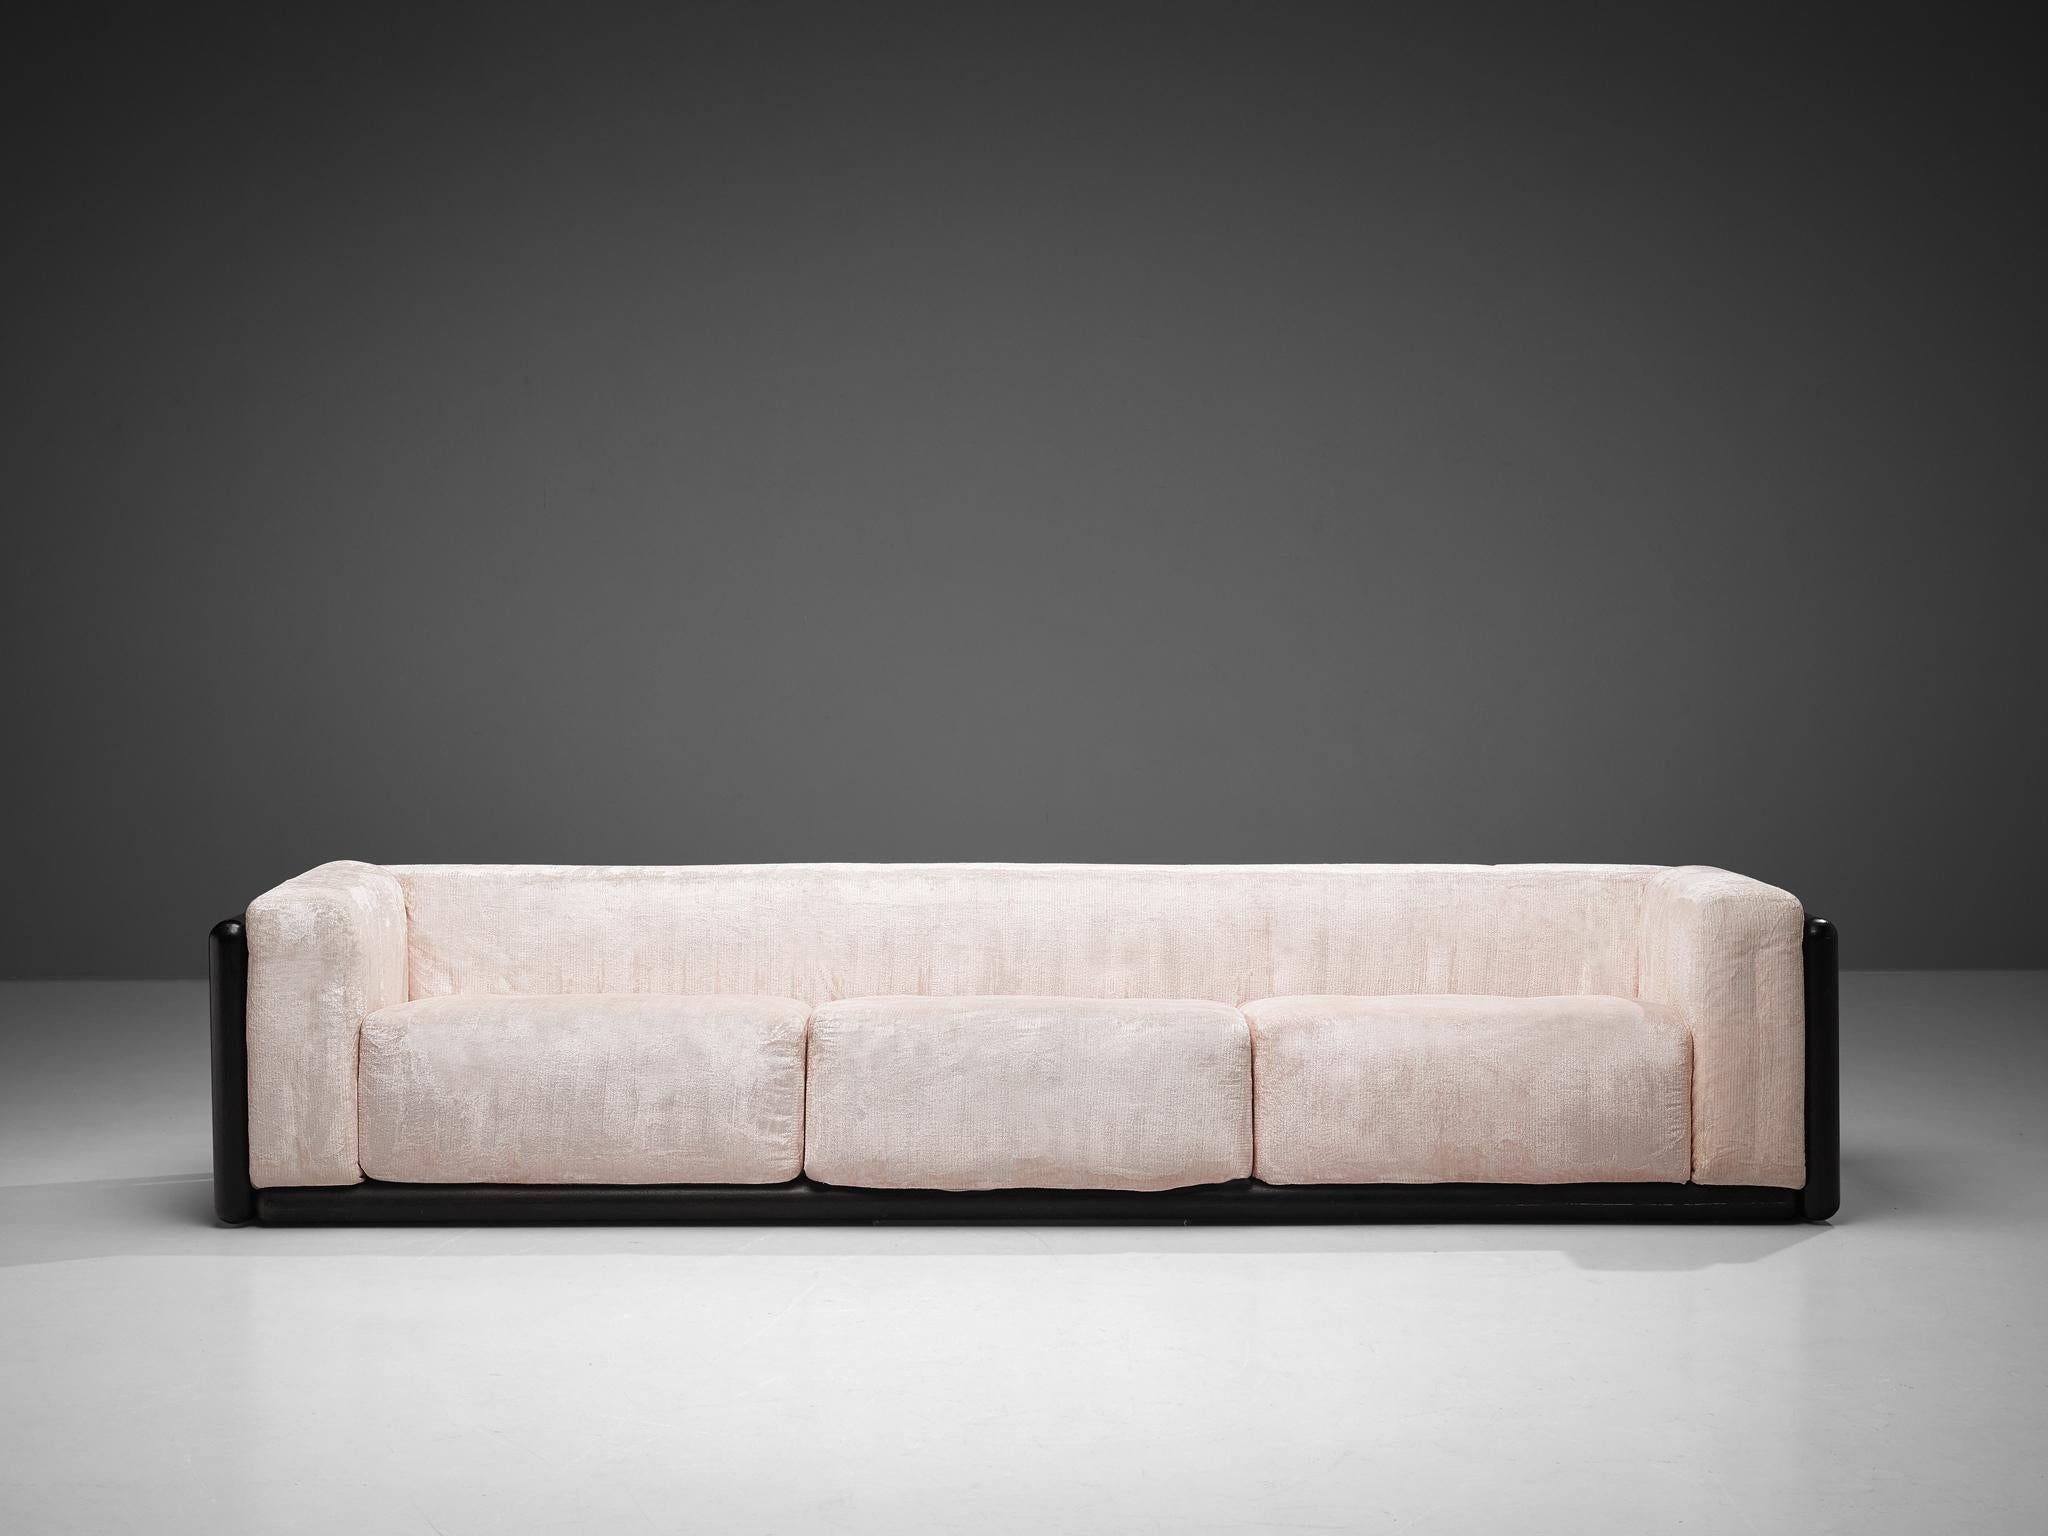 Carlo Scarpa for Simon Collezione, 'Cornaro' sofa, velvet fabric, stained mahogany, Italy, 1973 

The 'Cornaro' sofa by Carlo Scarpa is a perfect example of the Ultrarazionale style; breaking away from the strict limits of Rationalism, resulting in